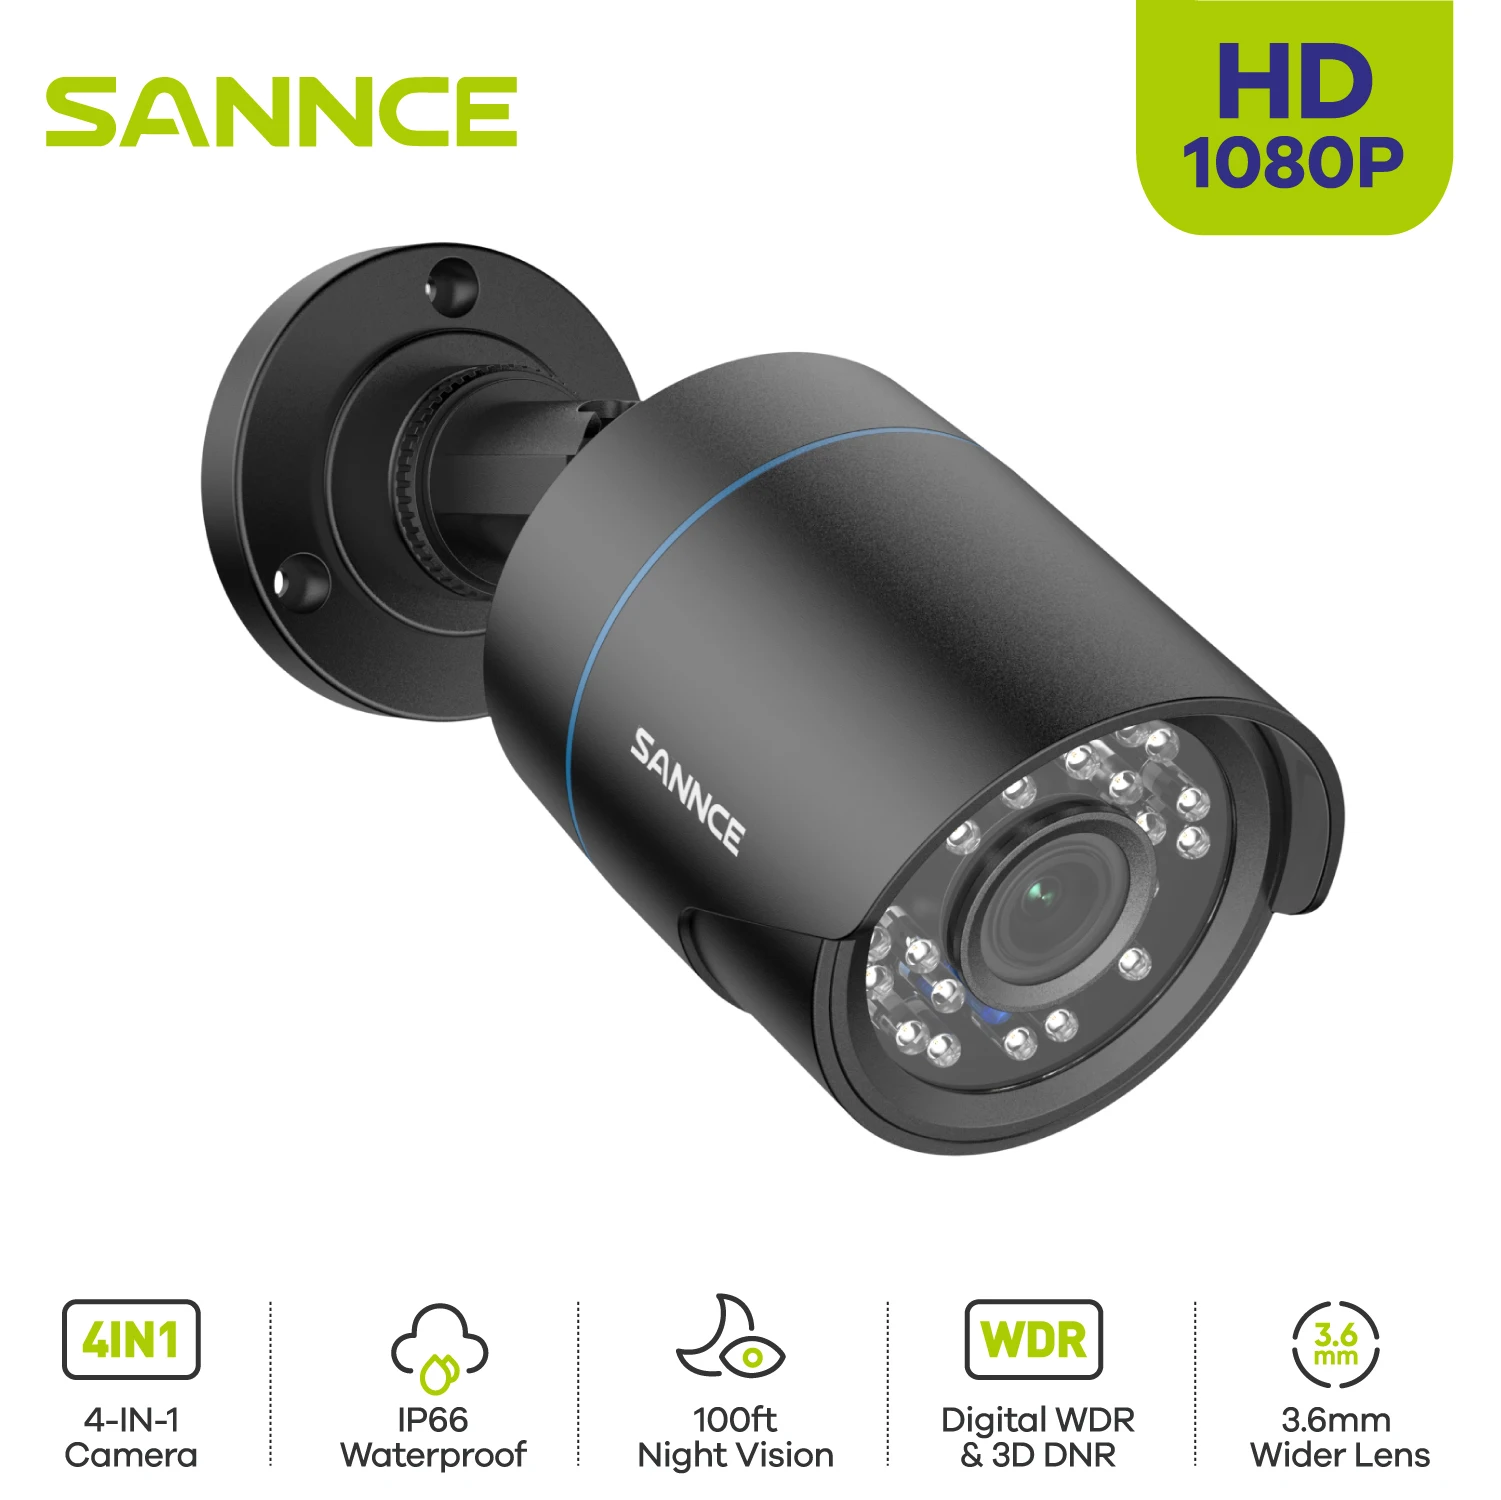 

the link is for The Additional extra Shipping Cost For CCTV System